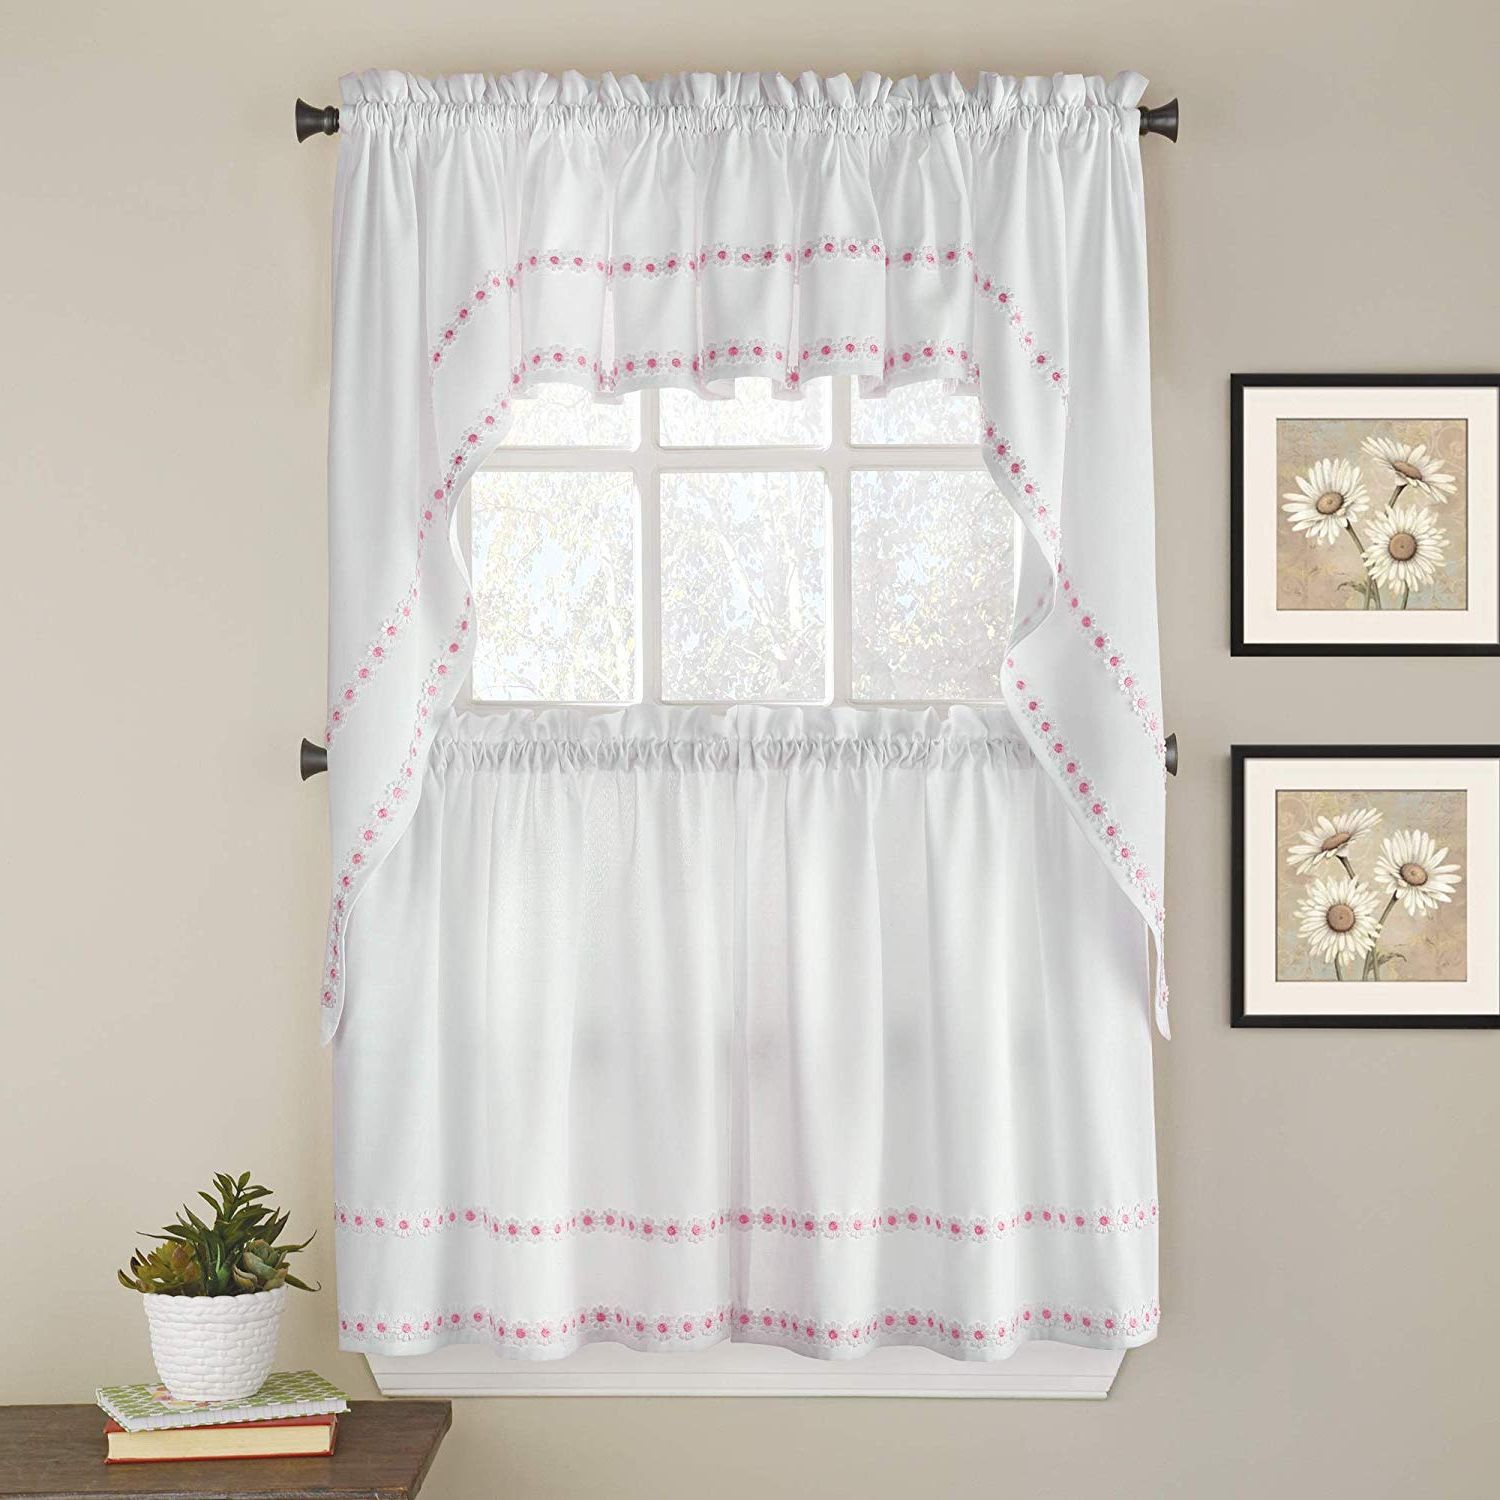 Abby Embroidered 5 Piece Curtain Tier And Swag Sets Inside Most Popular Sweet Home Collection Kitchen Window Curtain 5 Piece Set With Valance,  Swag, And Choice Of 24" Or 36" Tier Pair Daisy Mae Pink (View 8 of 20)